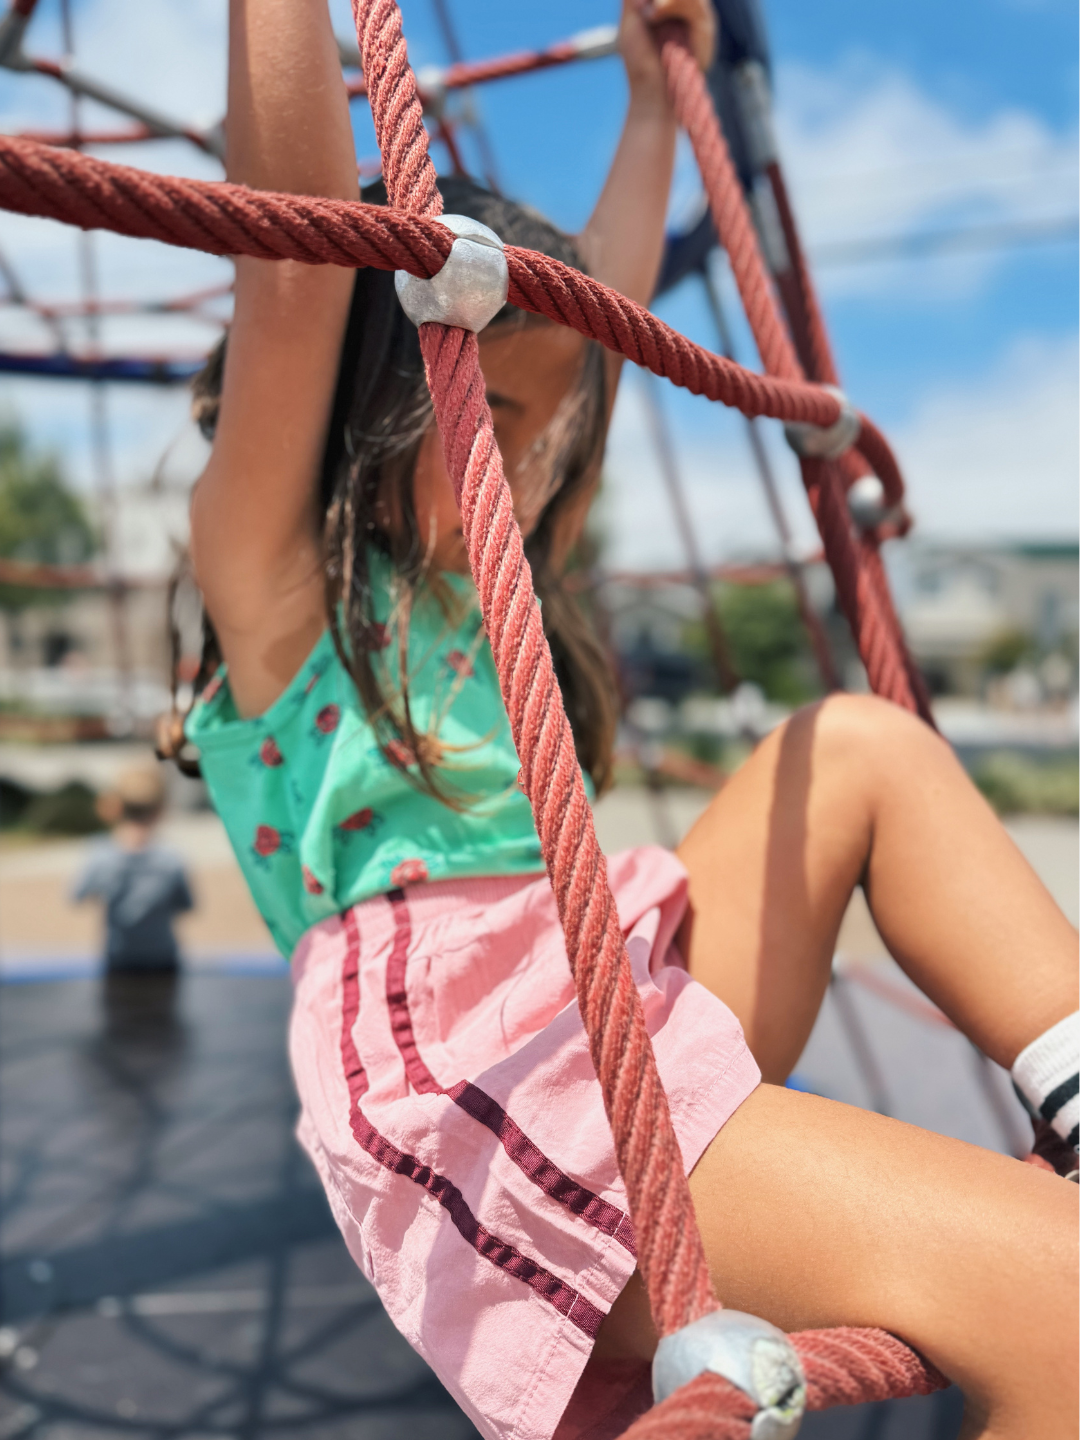 Girl wearing the kids' roses tank top with pink shorts with maroon stripes down the side. She is climbing on a red rope play structure.